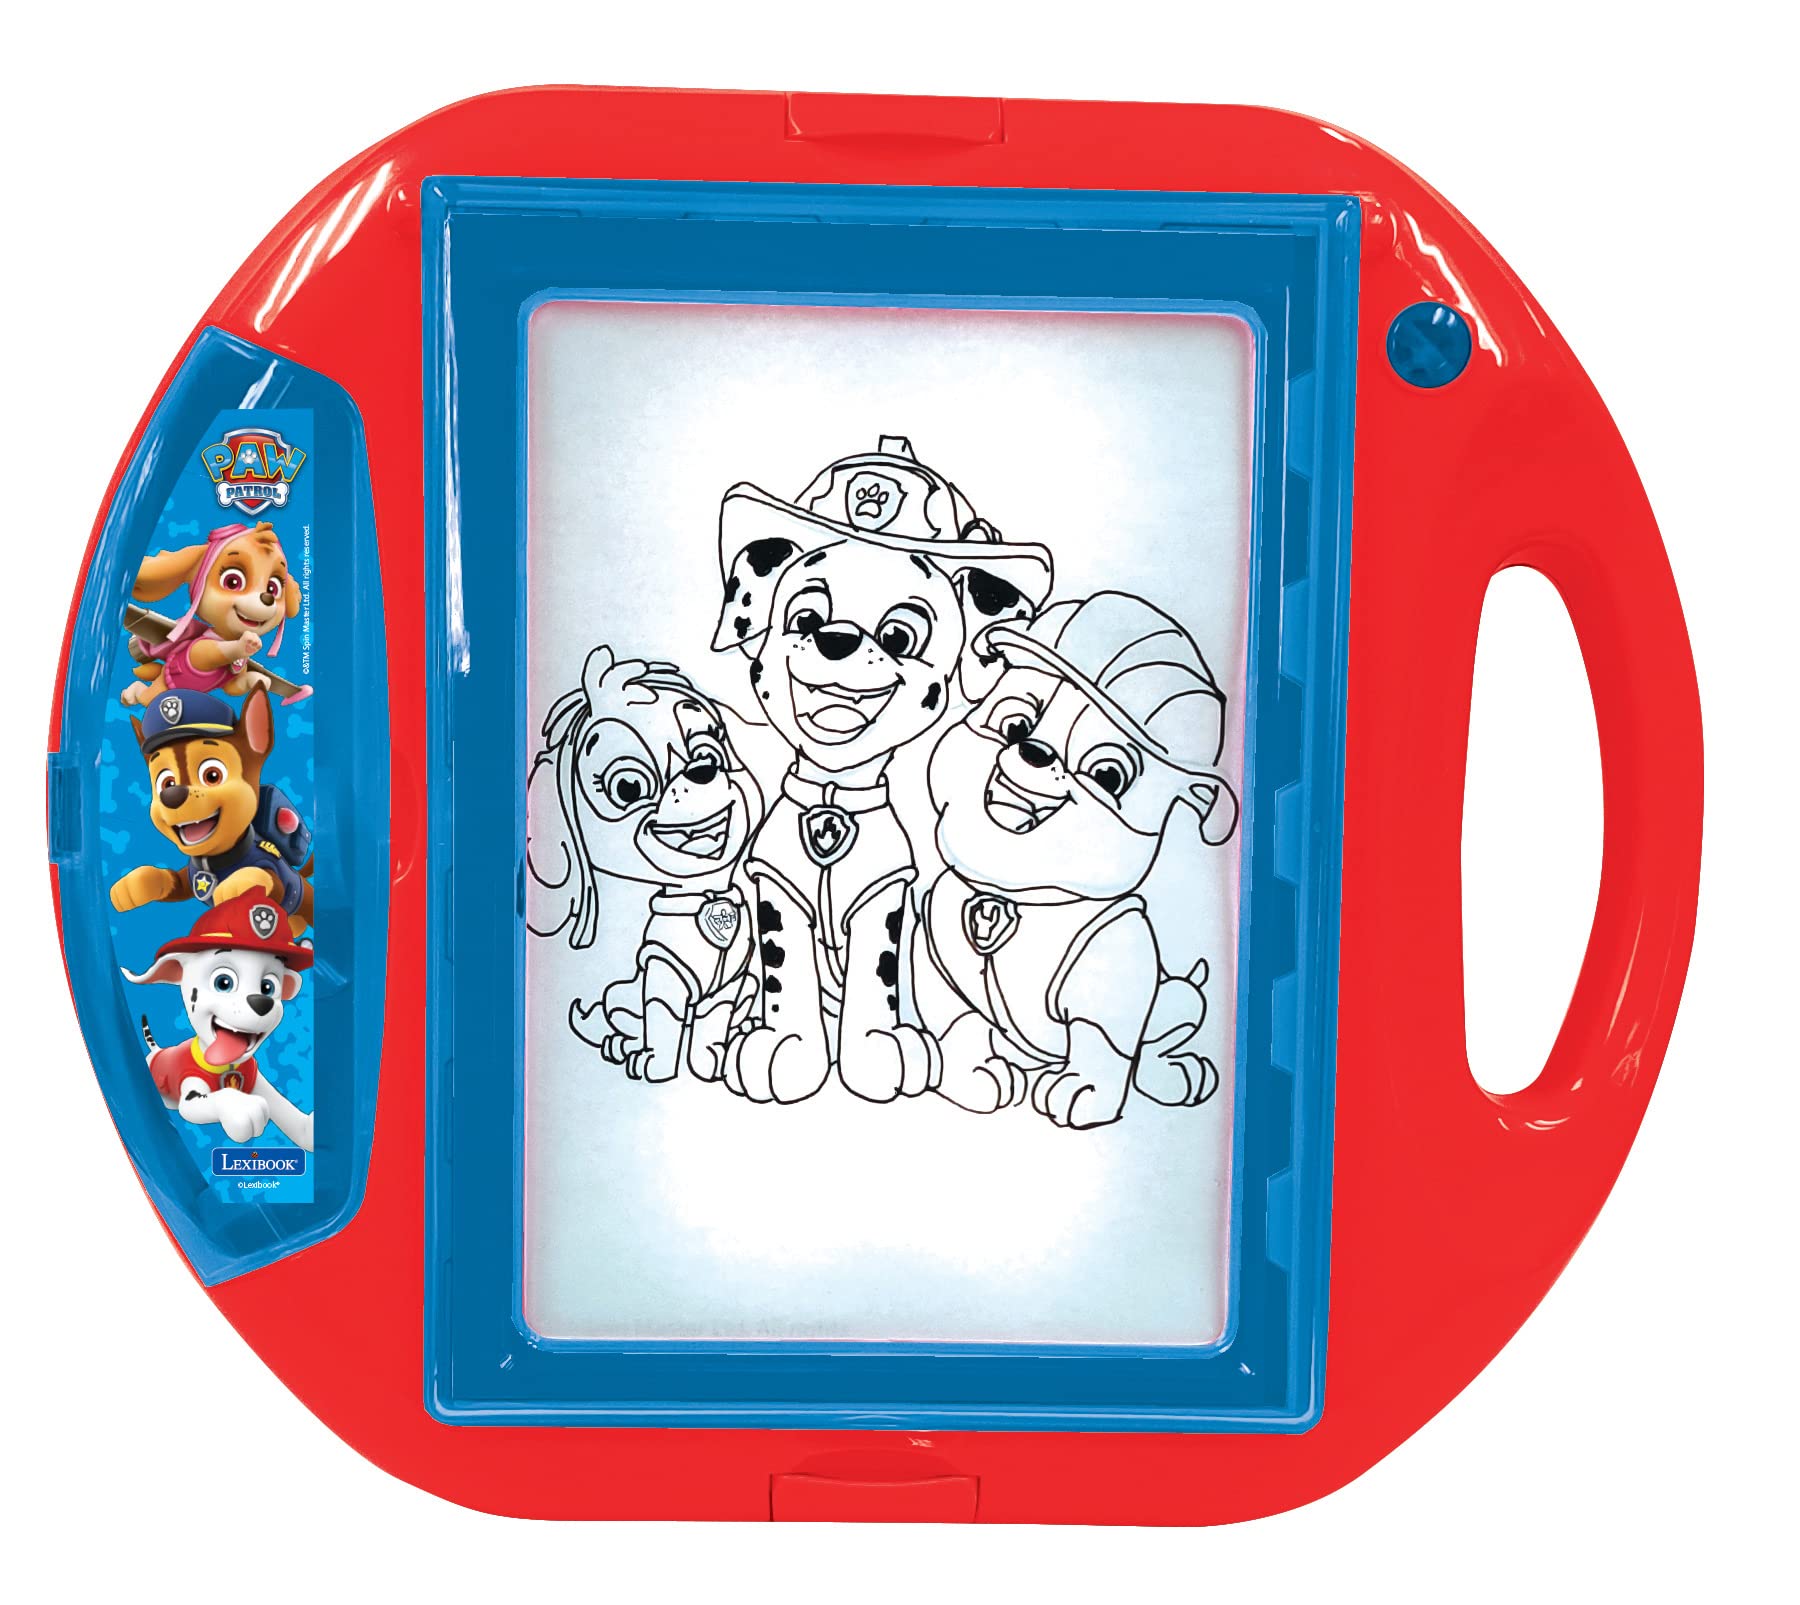 Lexibook Paw Patrol, Drawing Projector, 4 tampons, 10 templates, Lighting Screen, 1 Pen Included, Artistic and Creative Toy for Girls and Boys, Red/Blue, CR310PA